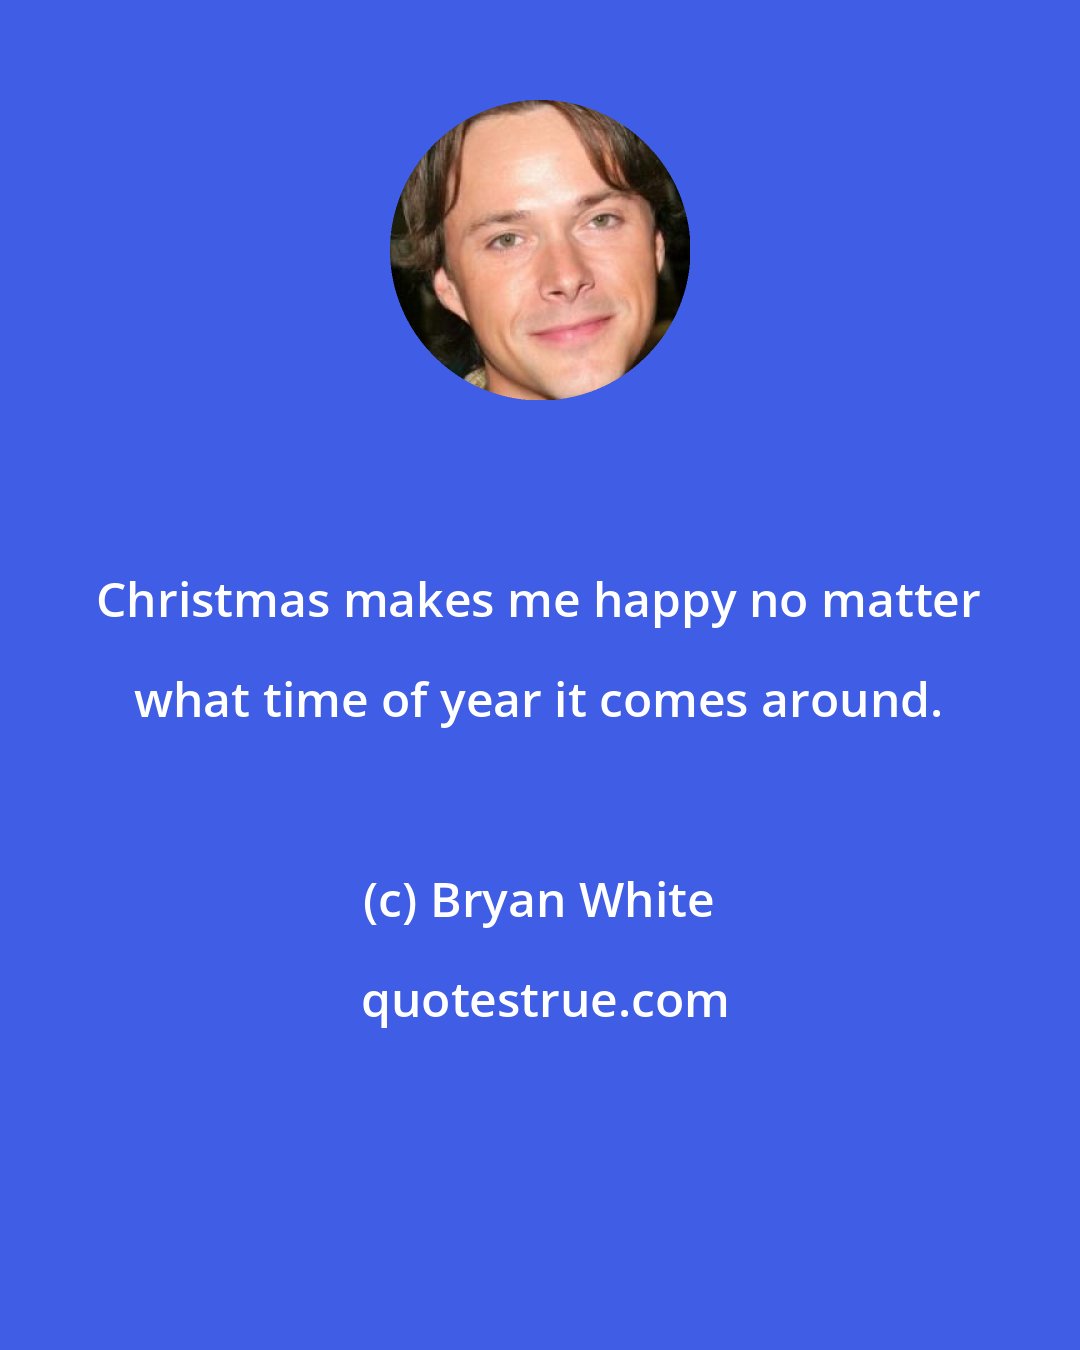 Bryan White: Christmas makes me happy no matter what time of year it comes around.